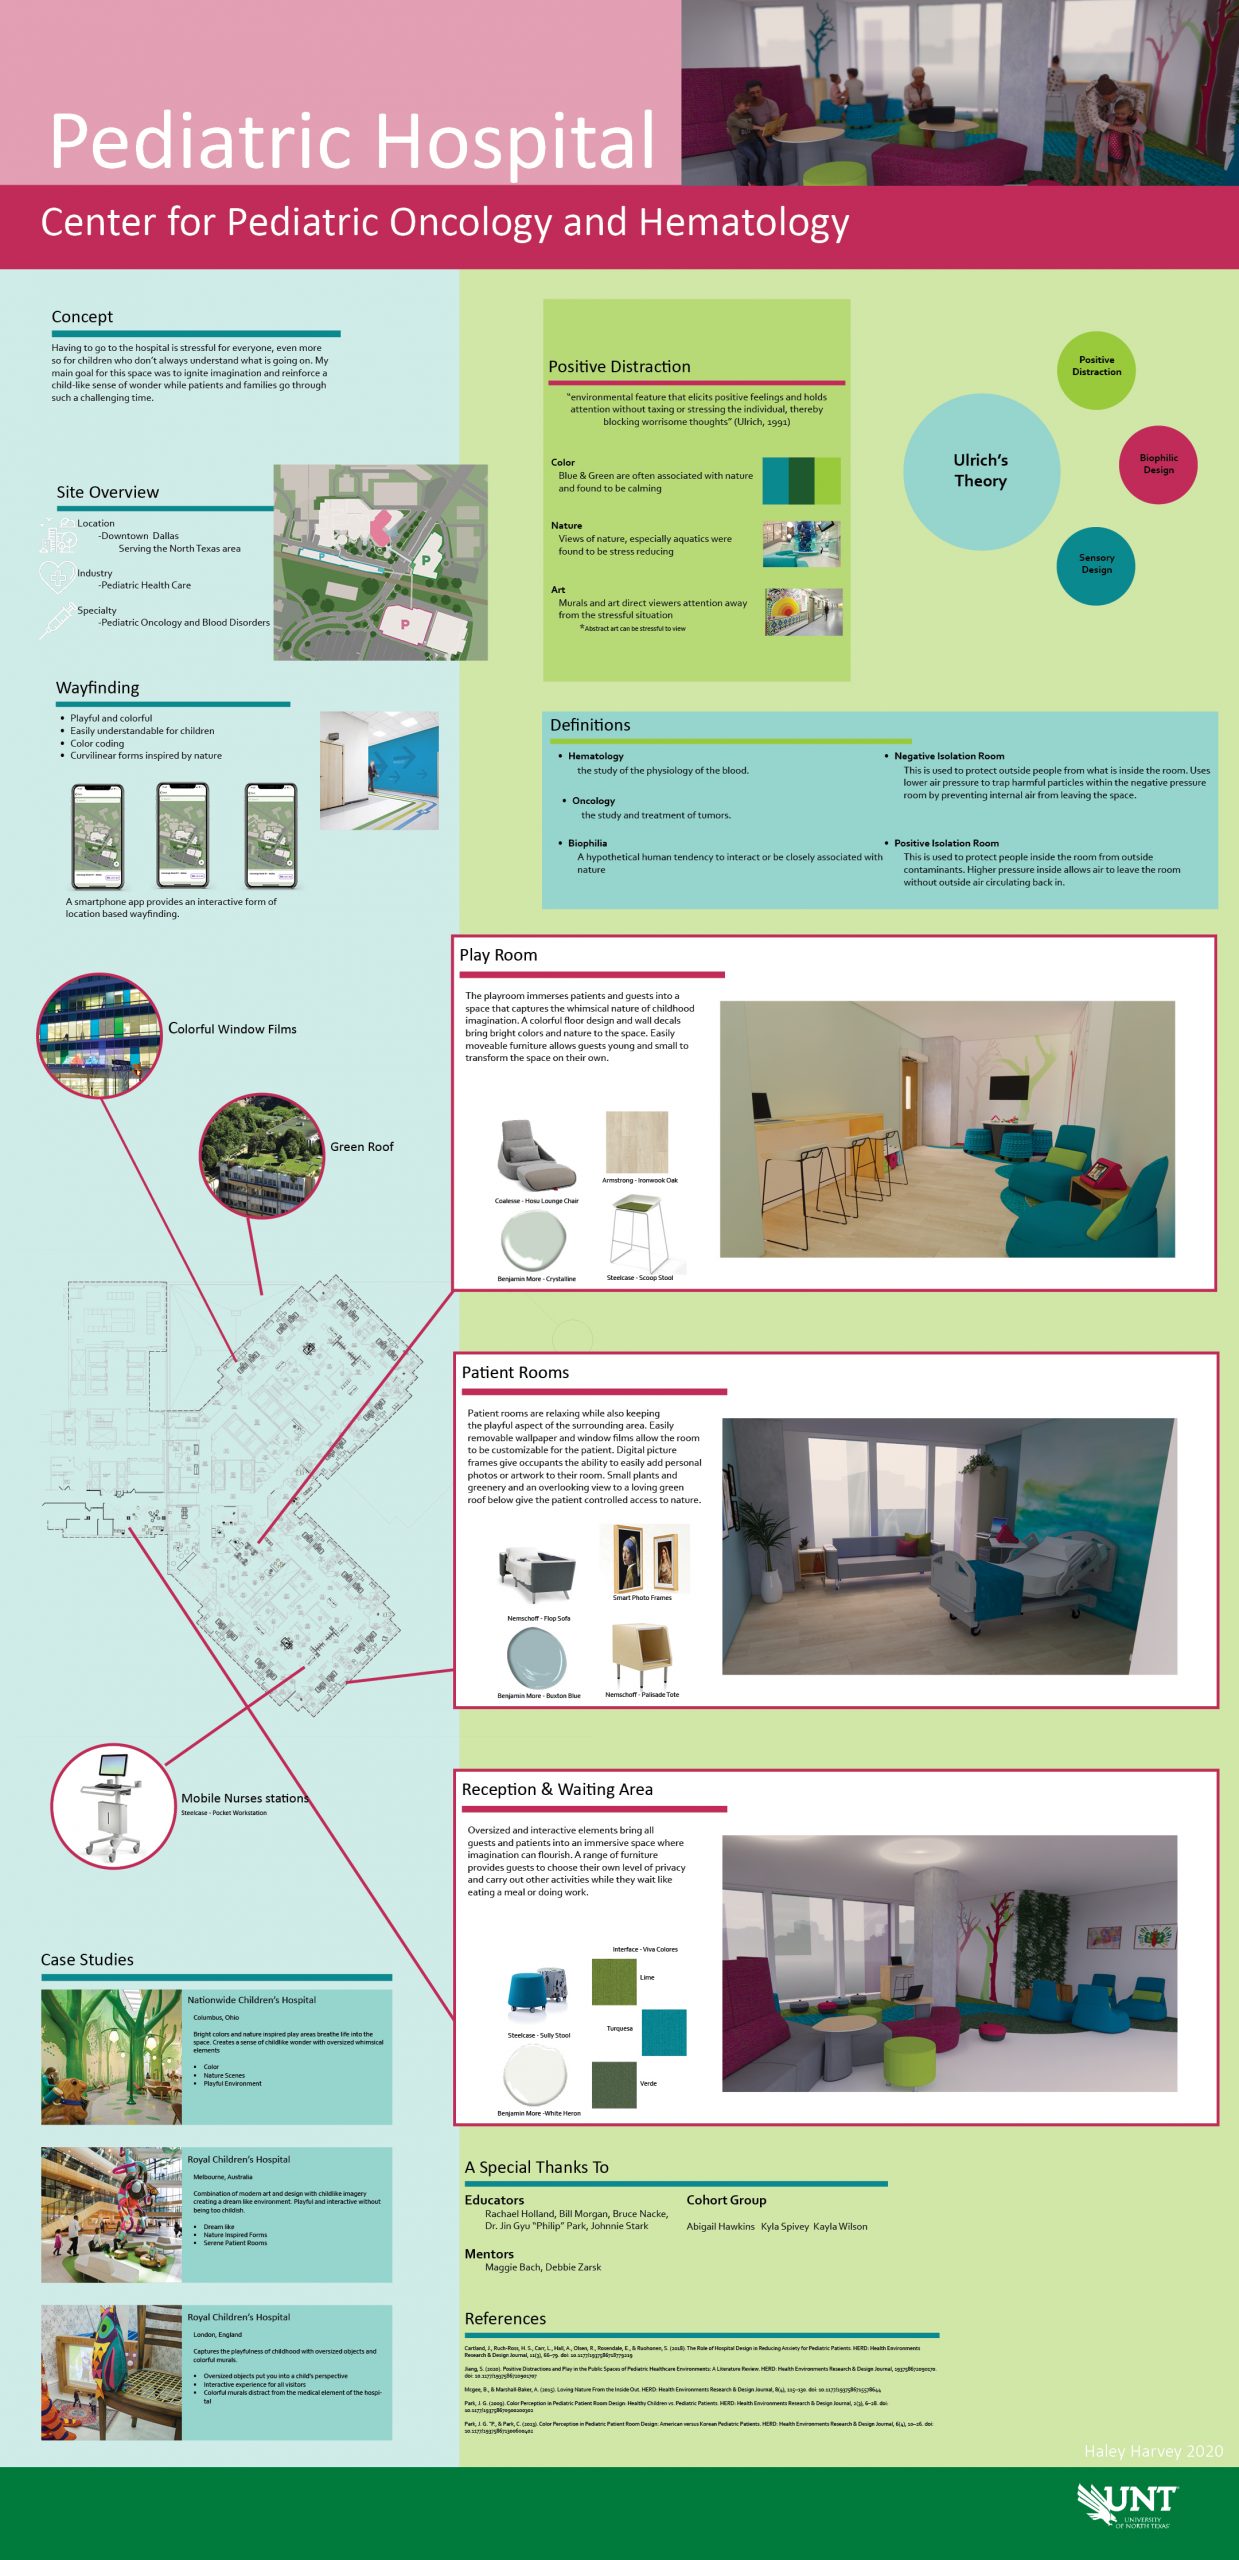 Pediatric hospital - Site overview, play room, patient room, reception and waiting area designs